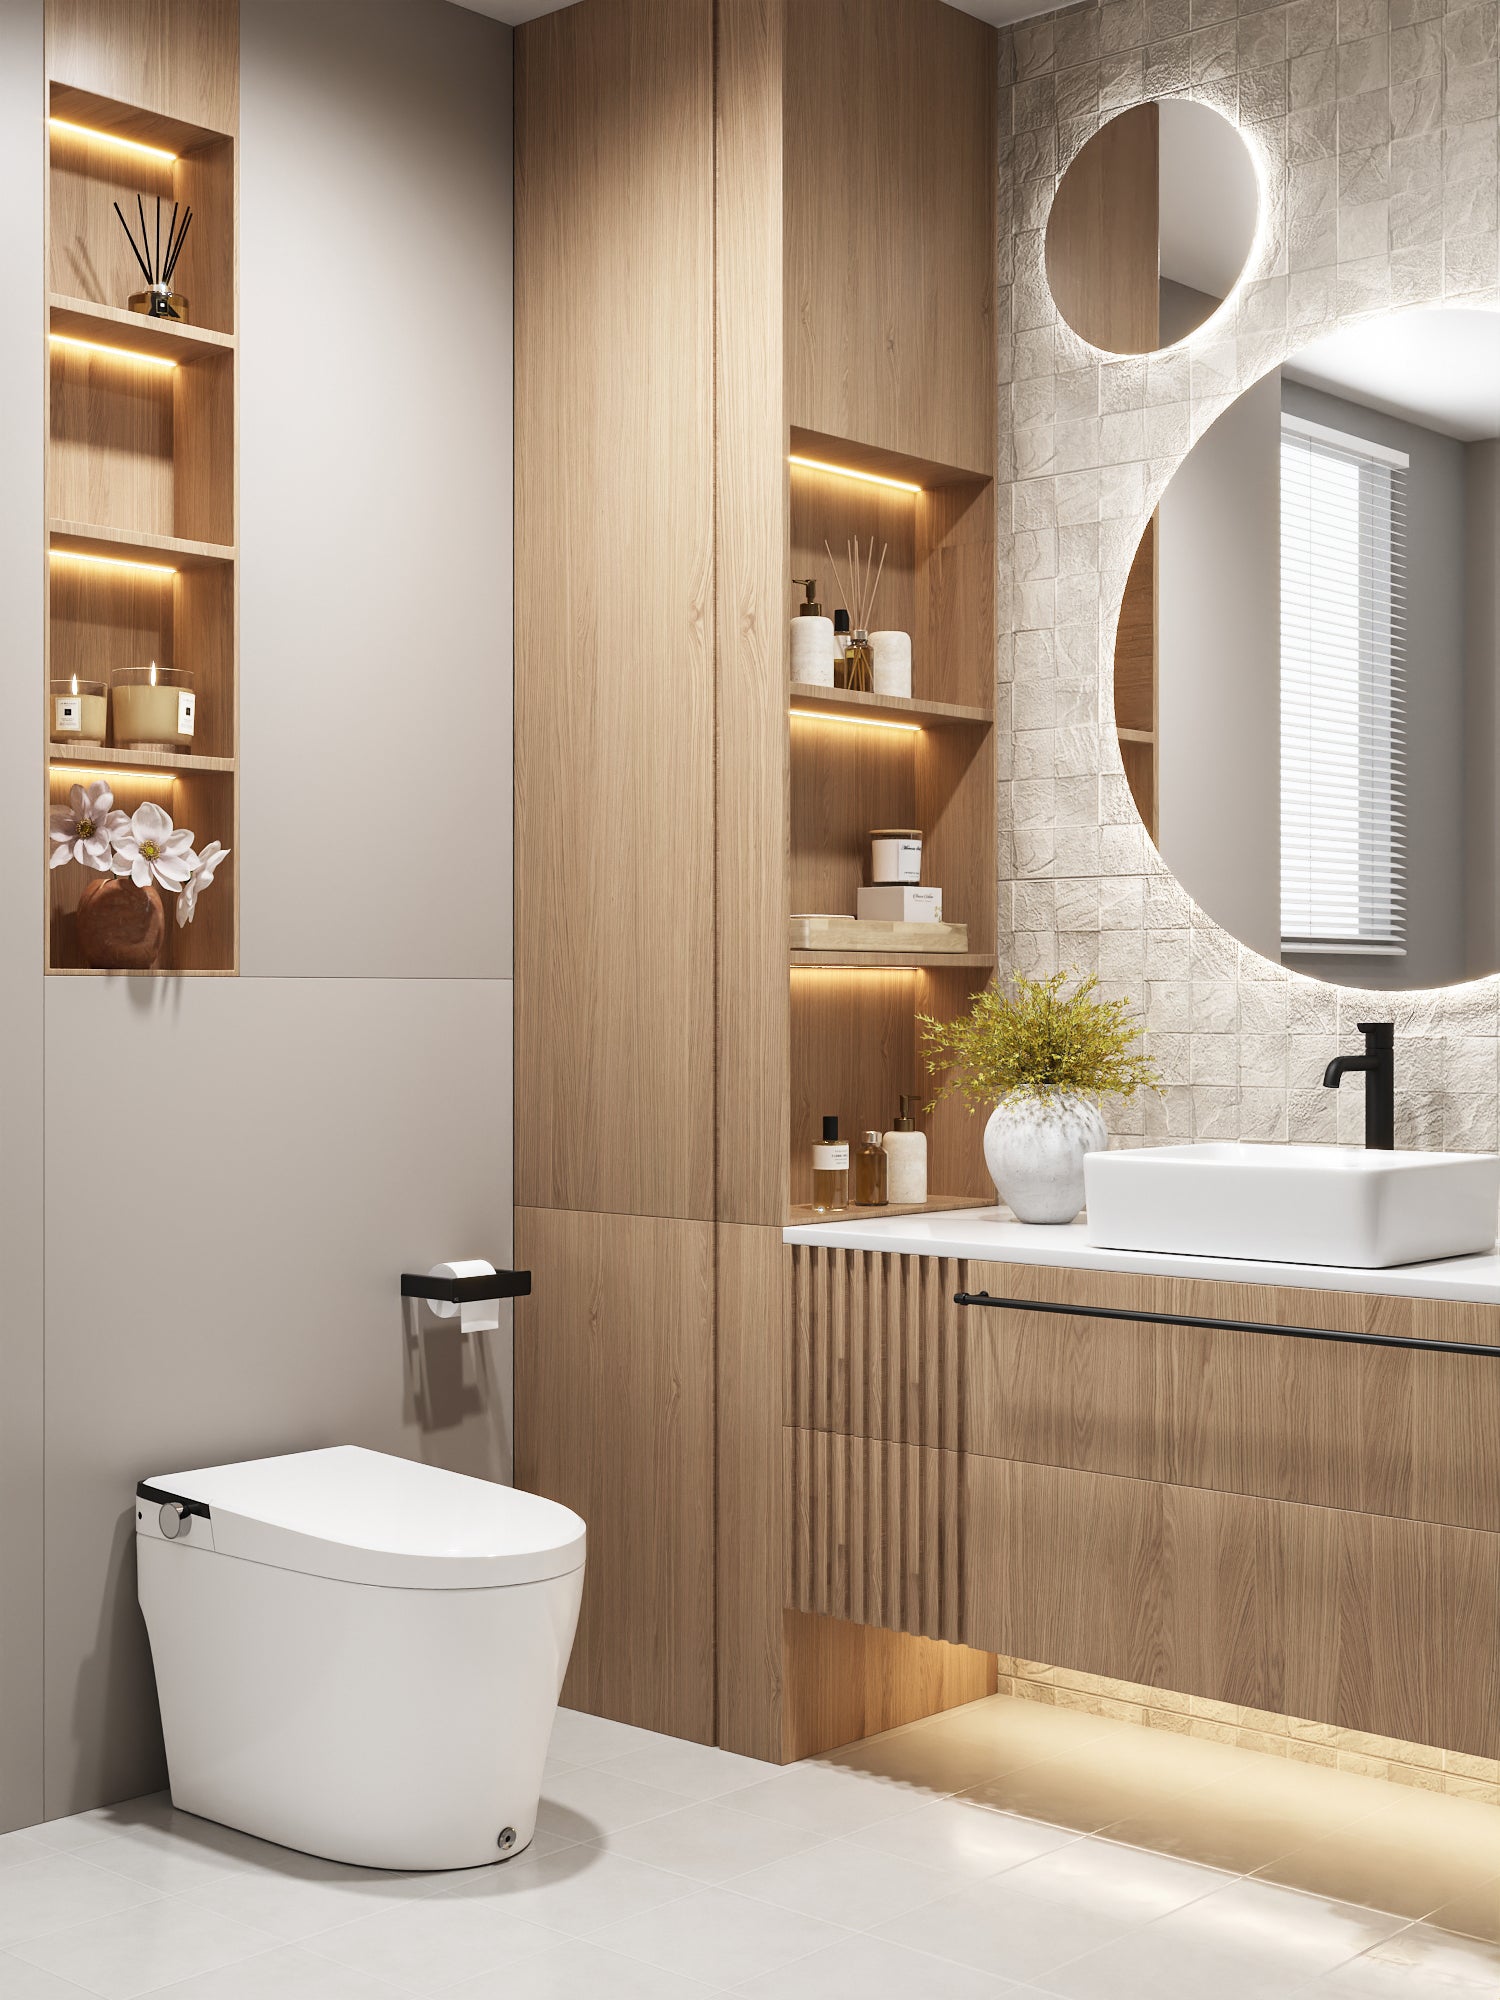 Bathroom with a bidet - how to design it? - SanSwiss